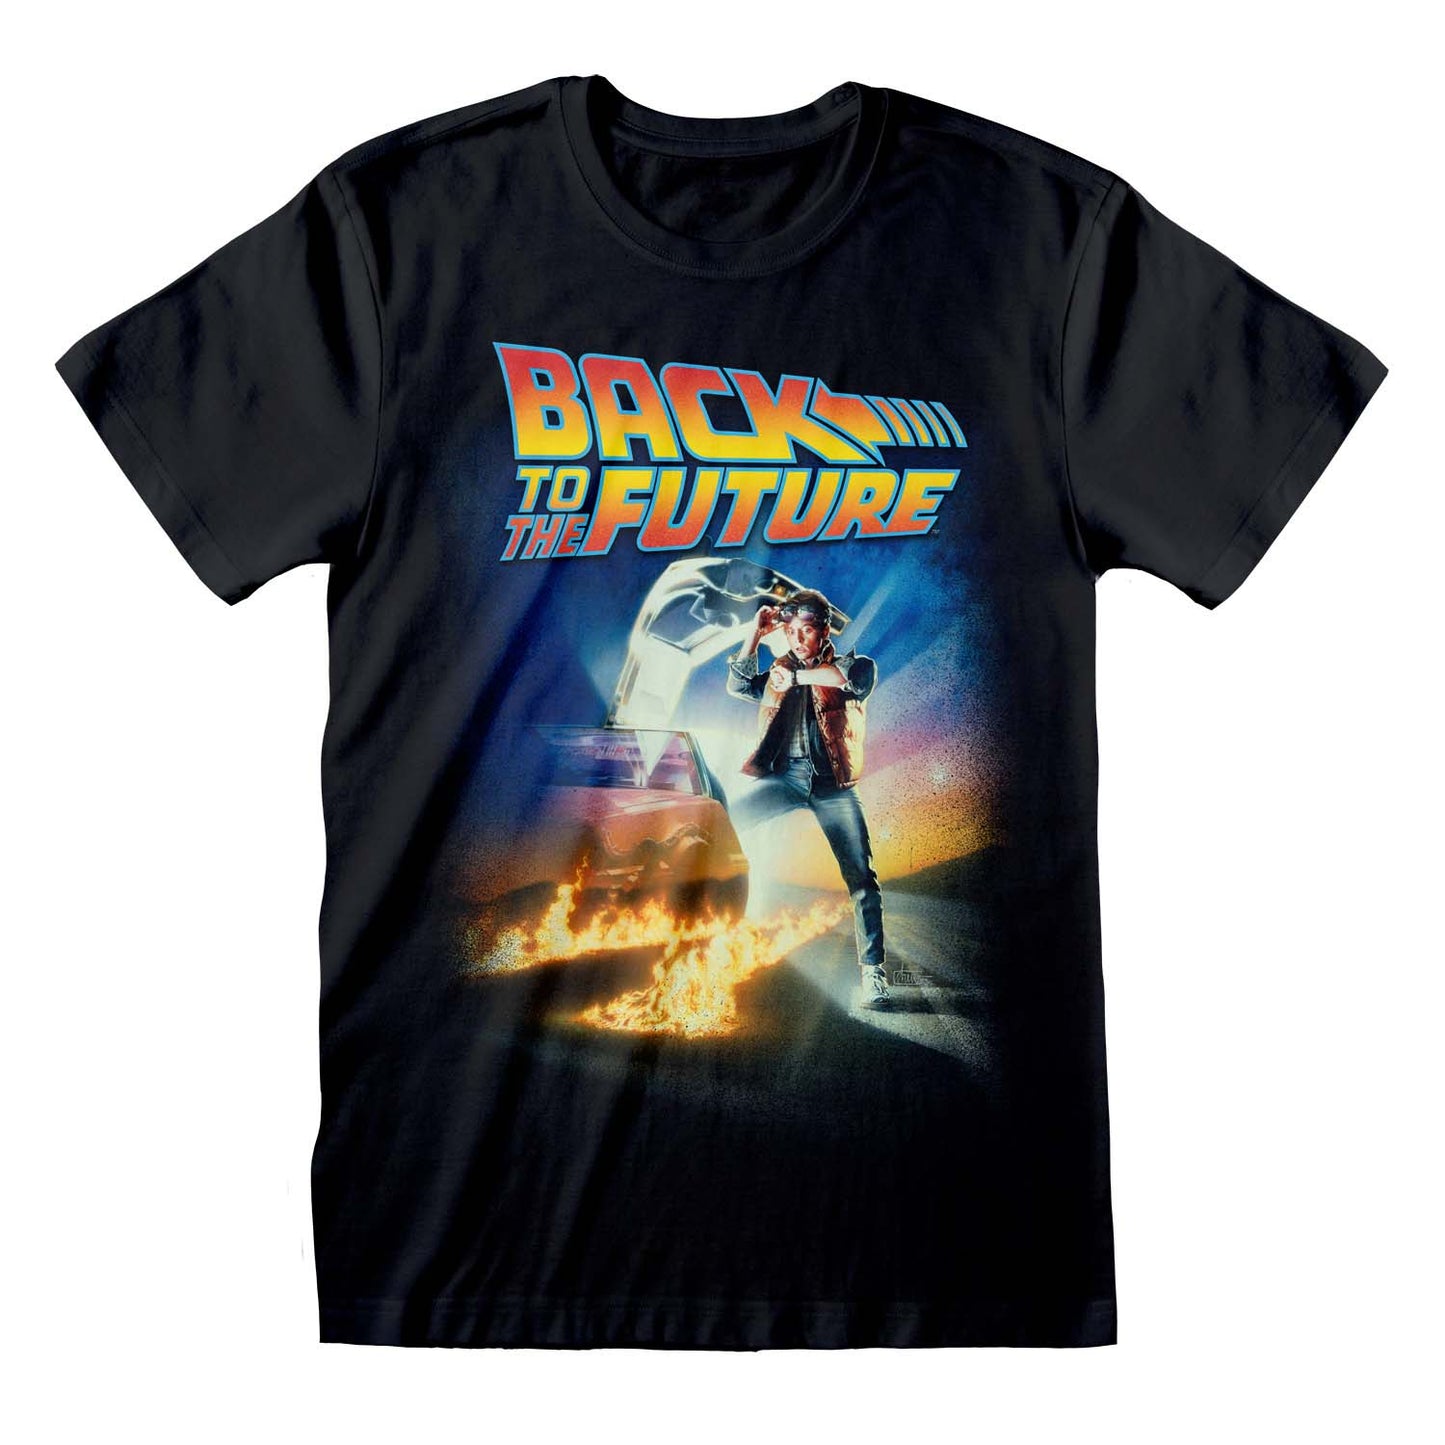 BACK TO THE FUTURE - Poster (HI) T-Shirt